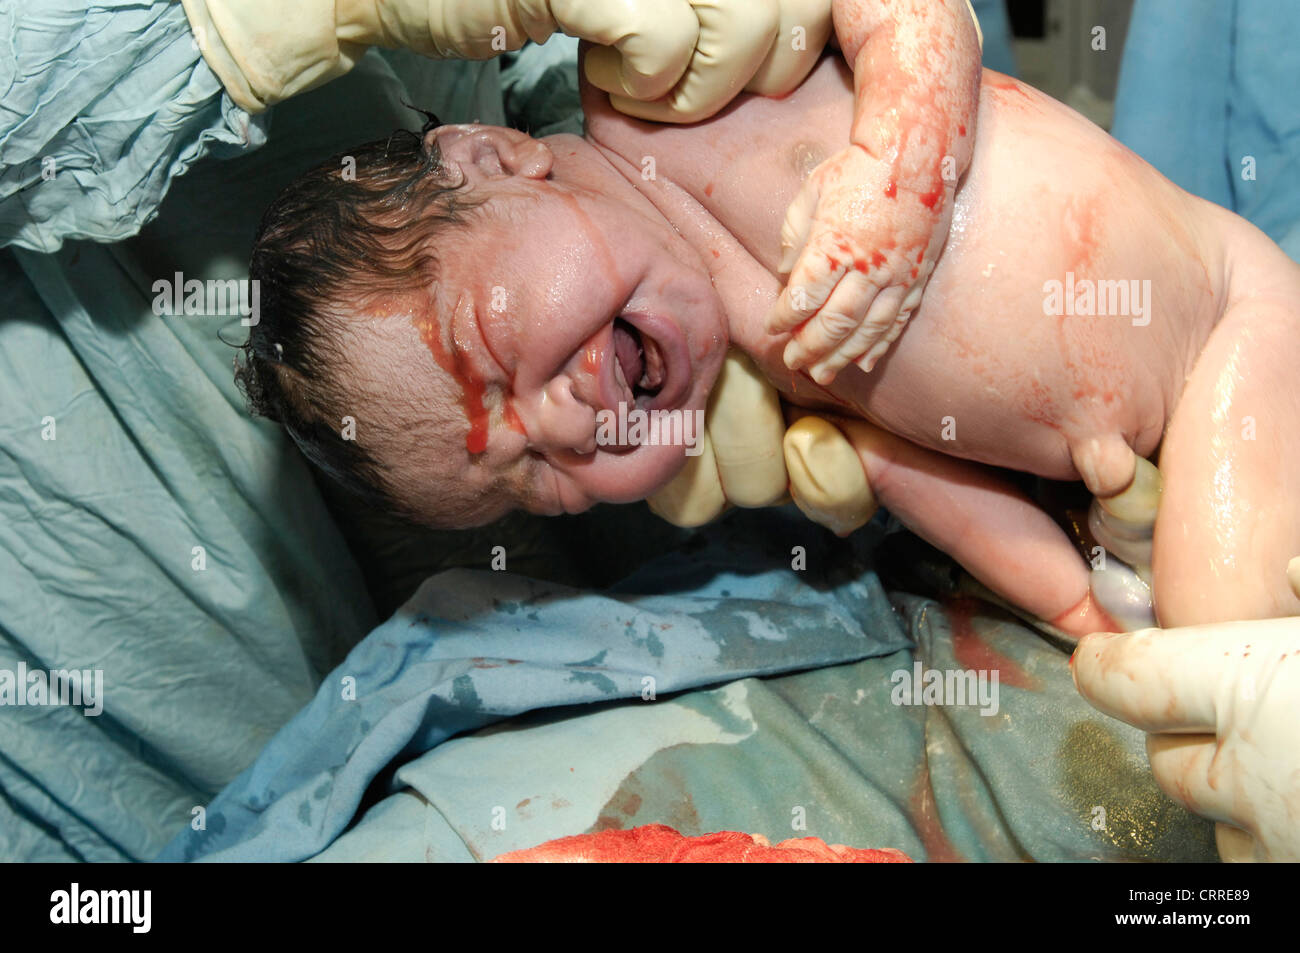 The obstetrician hands the baby over to the pediatric team who will assess it's status. Stock Photo